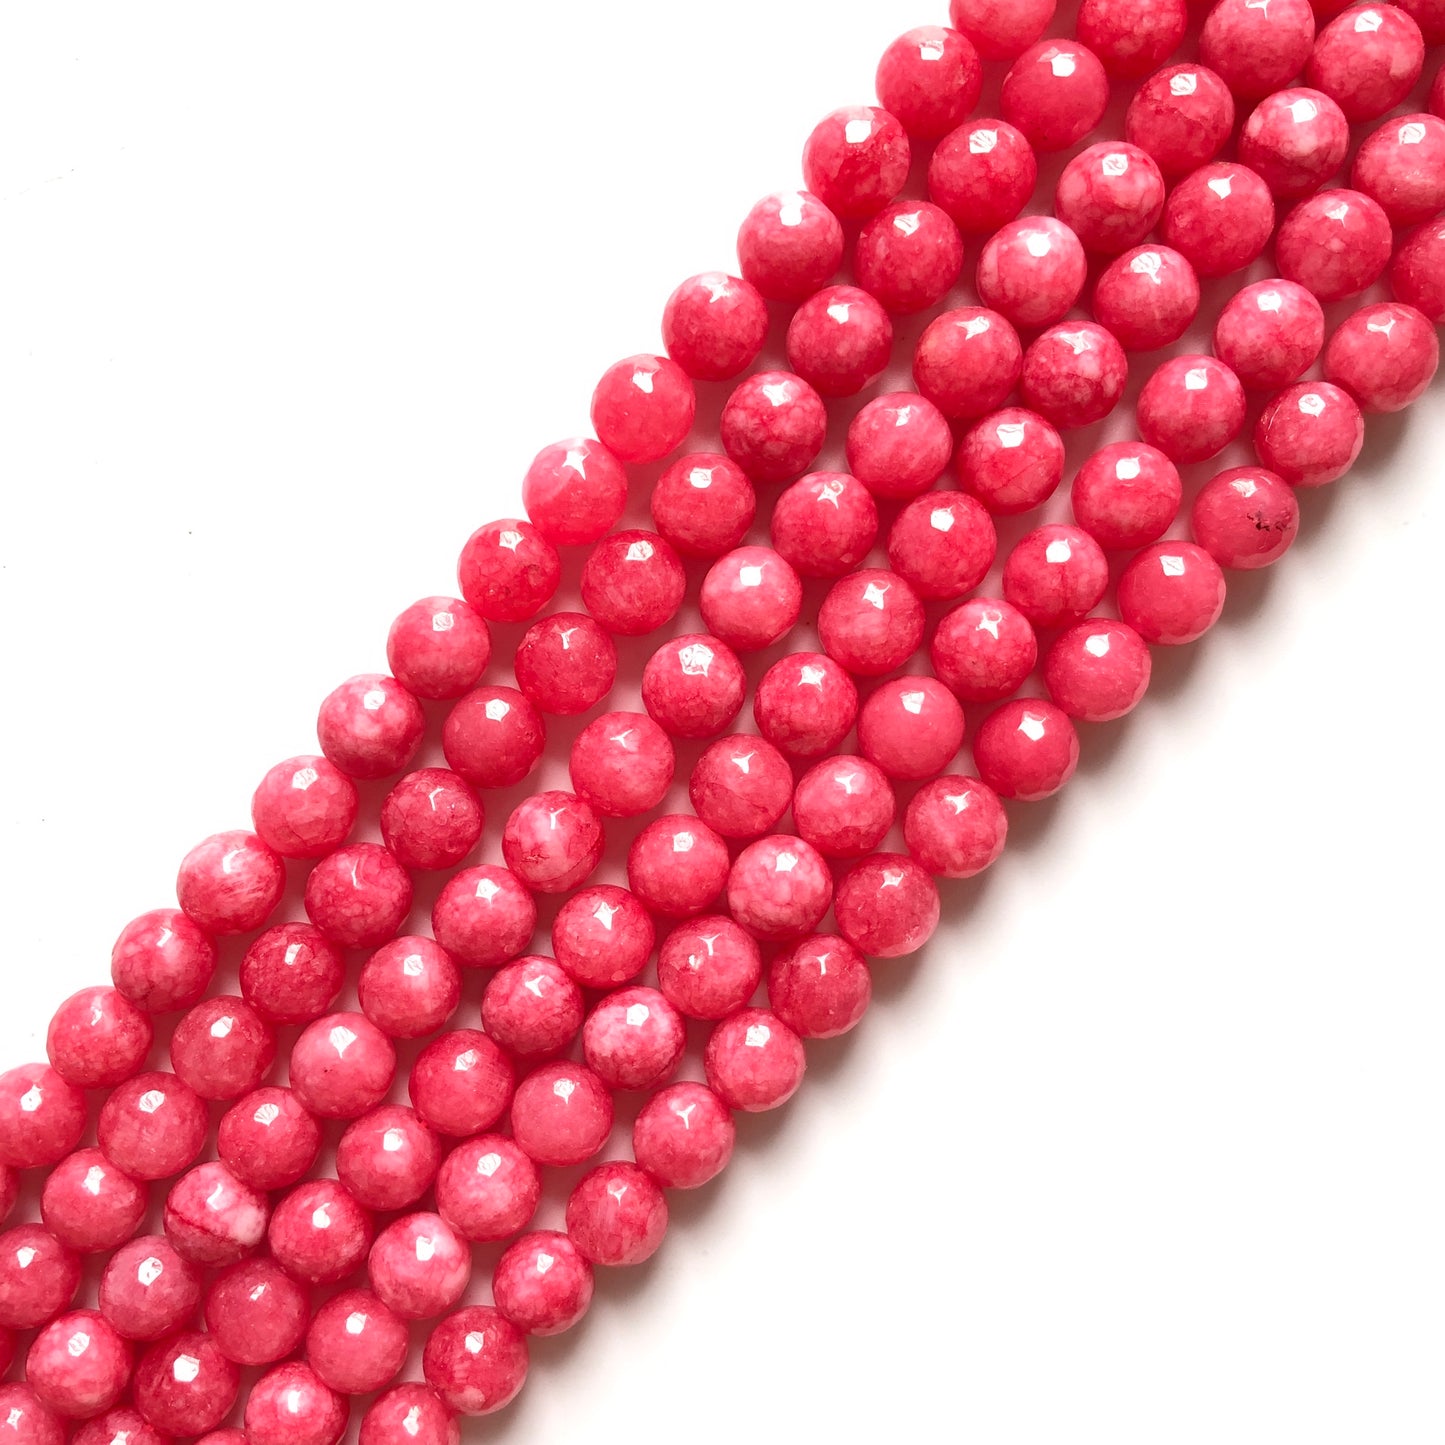 2 Strands/lot 10mm Pink Faceted Jade Stone Beads Stone Beads Faceted Jade Beads Charms Beads Beyond